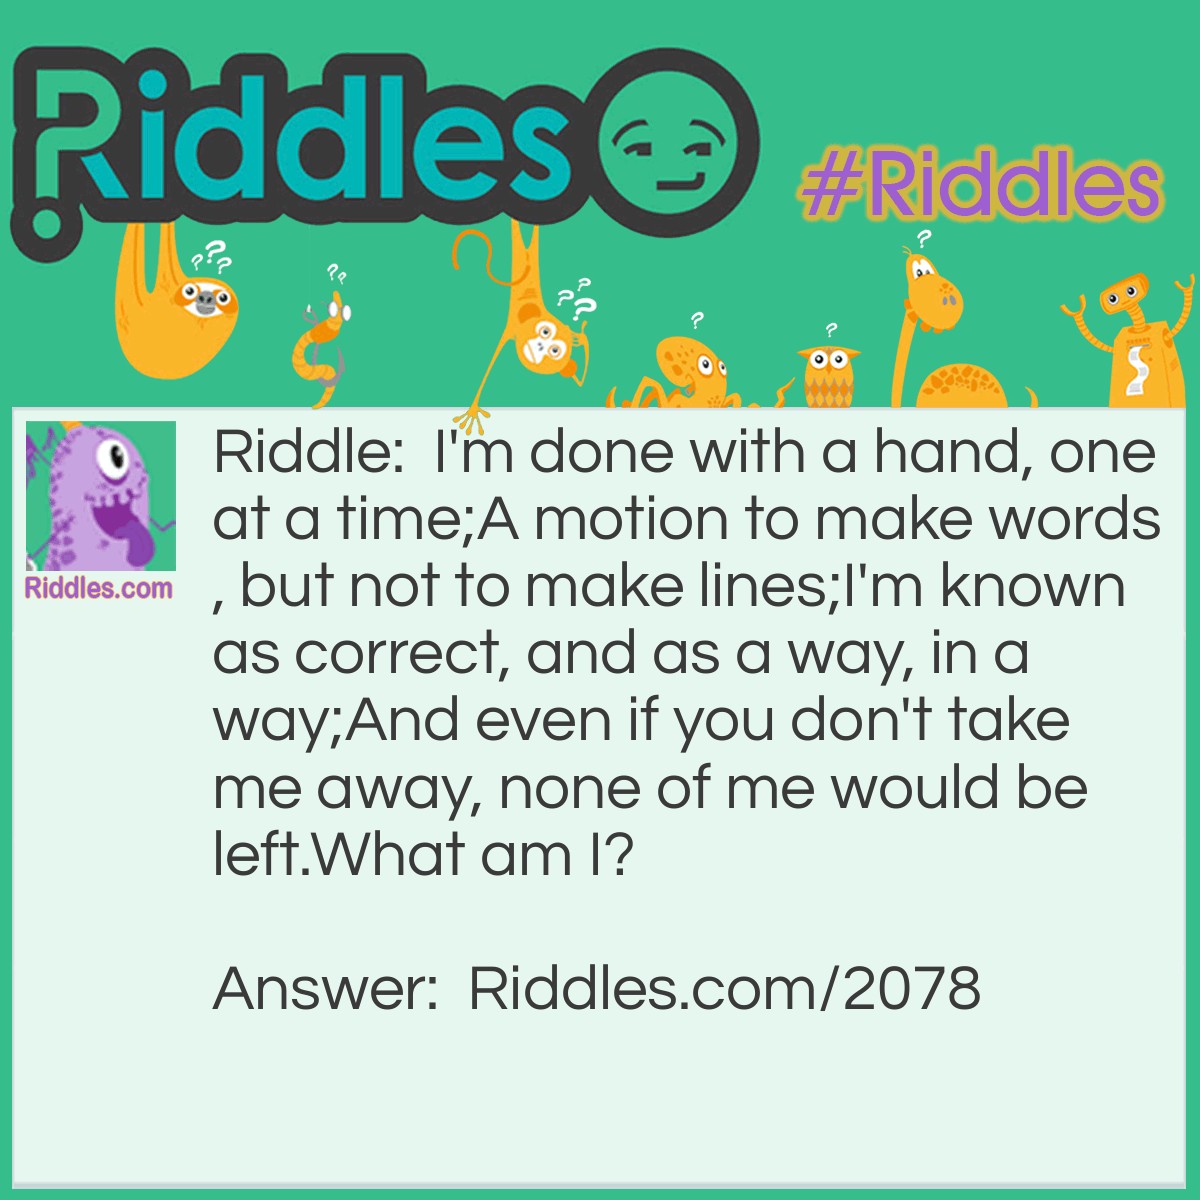 Riddle: I'm done with a hand, one at a time;
A motion to make words, but not to make lines;
I'm known as correct, and as a way, in a way;
And even if you don't take me away, none of me would be left.
What am I? Answer: Write/Right